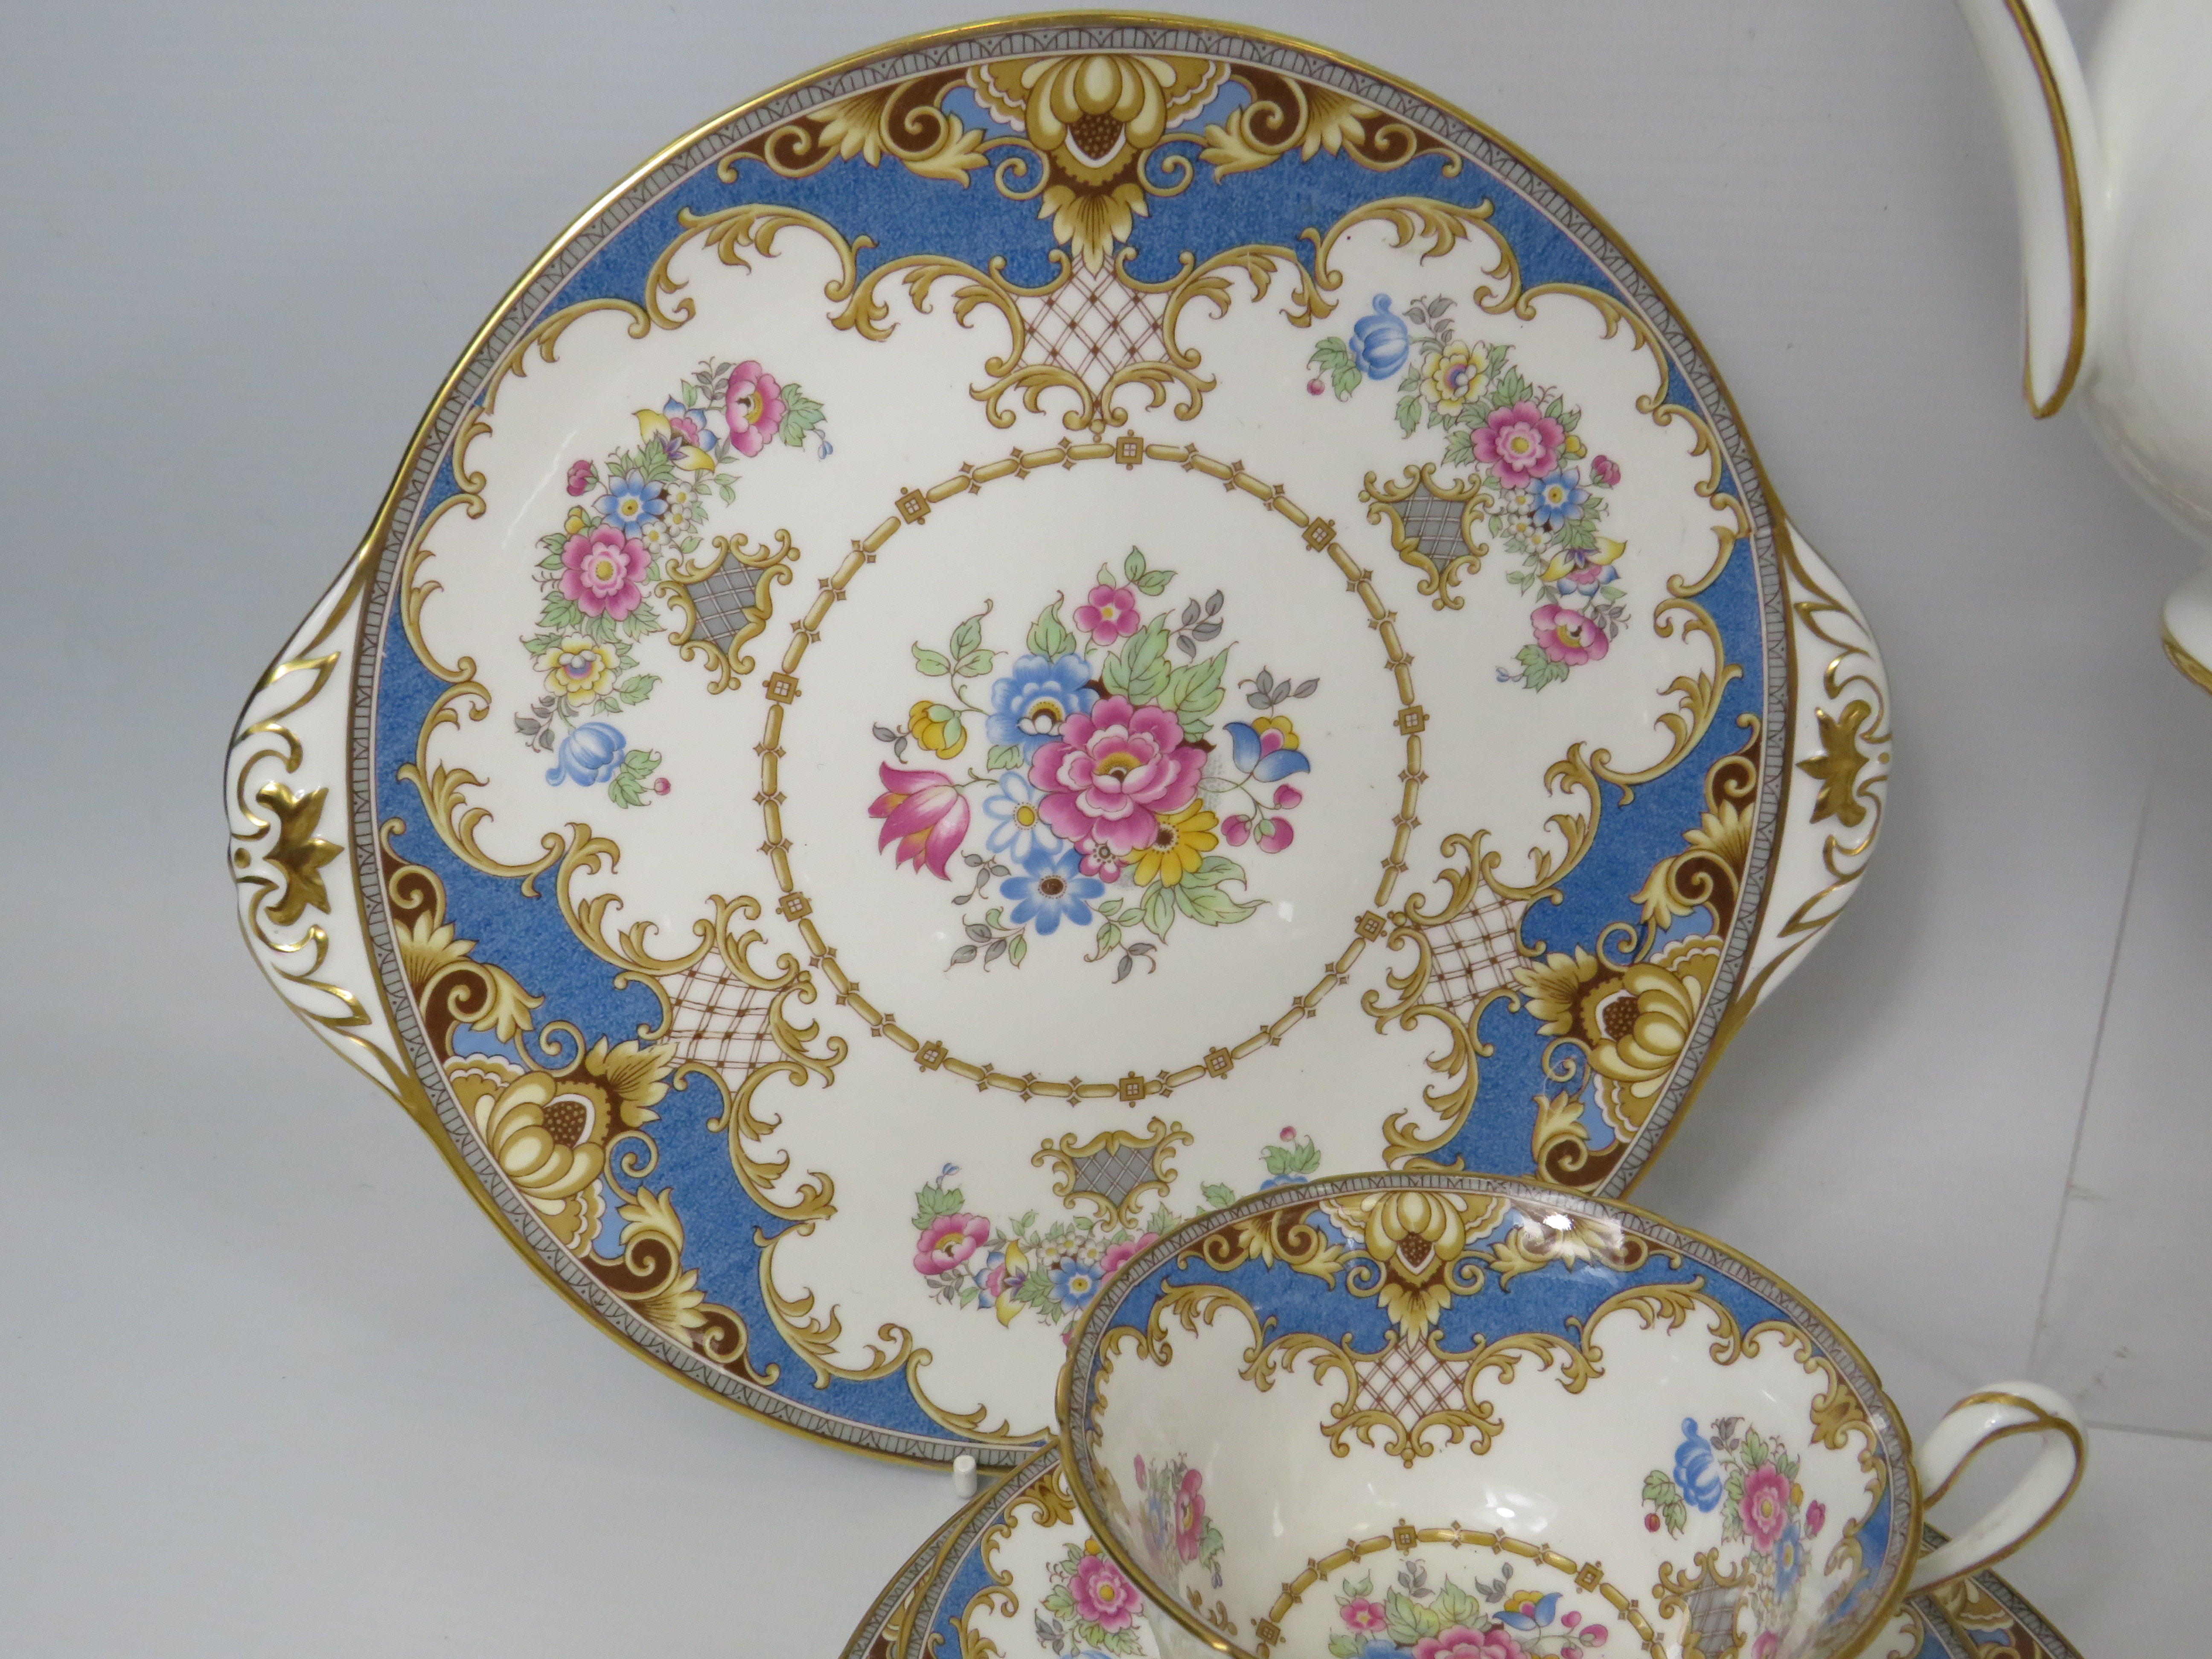 42 Pieces of Shelley Sheraton Teaset, 2 cake plates, Teapot, 12 cups, saucers and side plates plus - Image 8 of 8